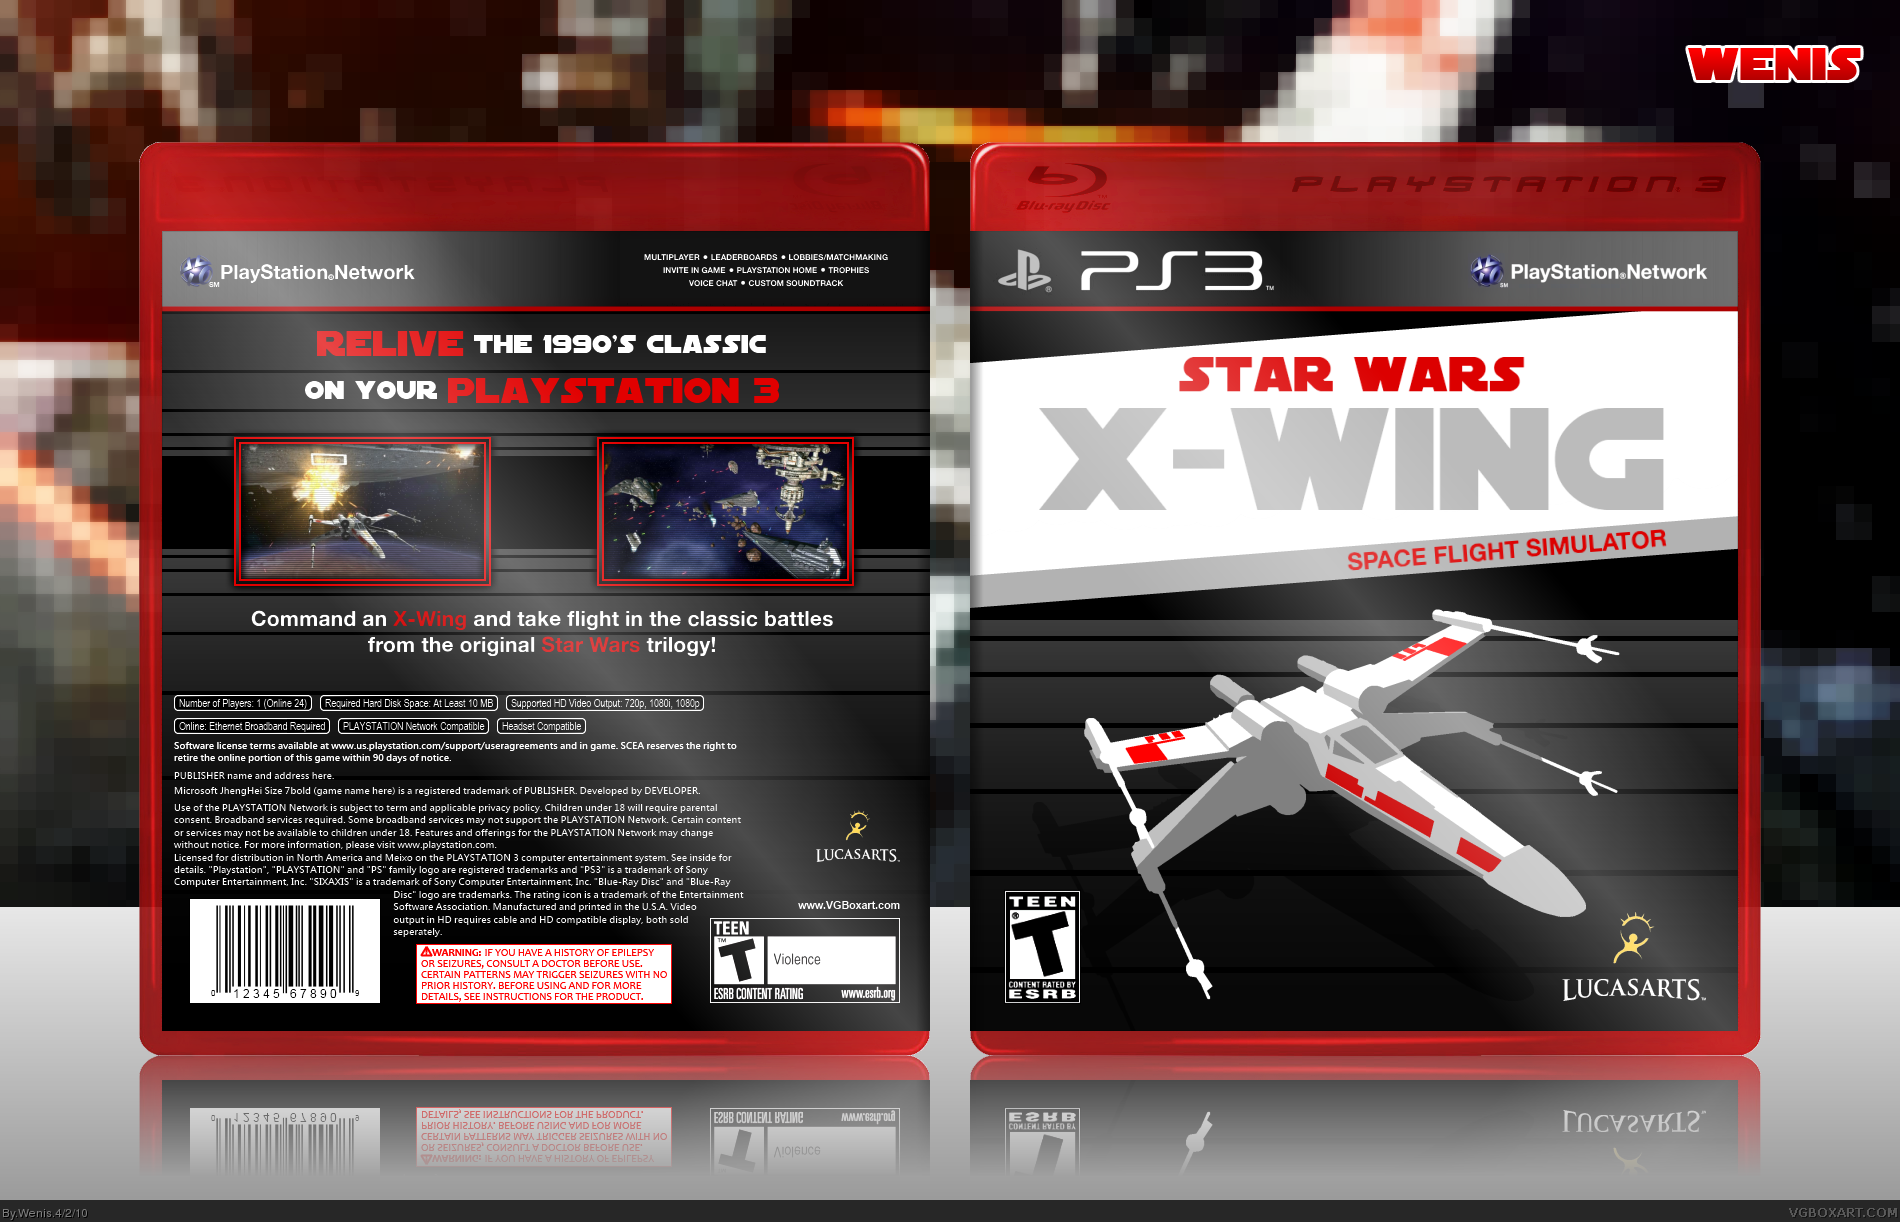 Star Wars X-Wing box cover